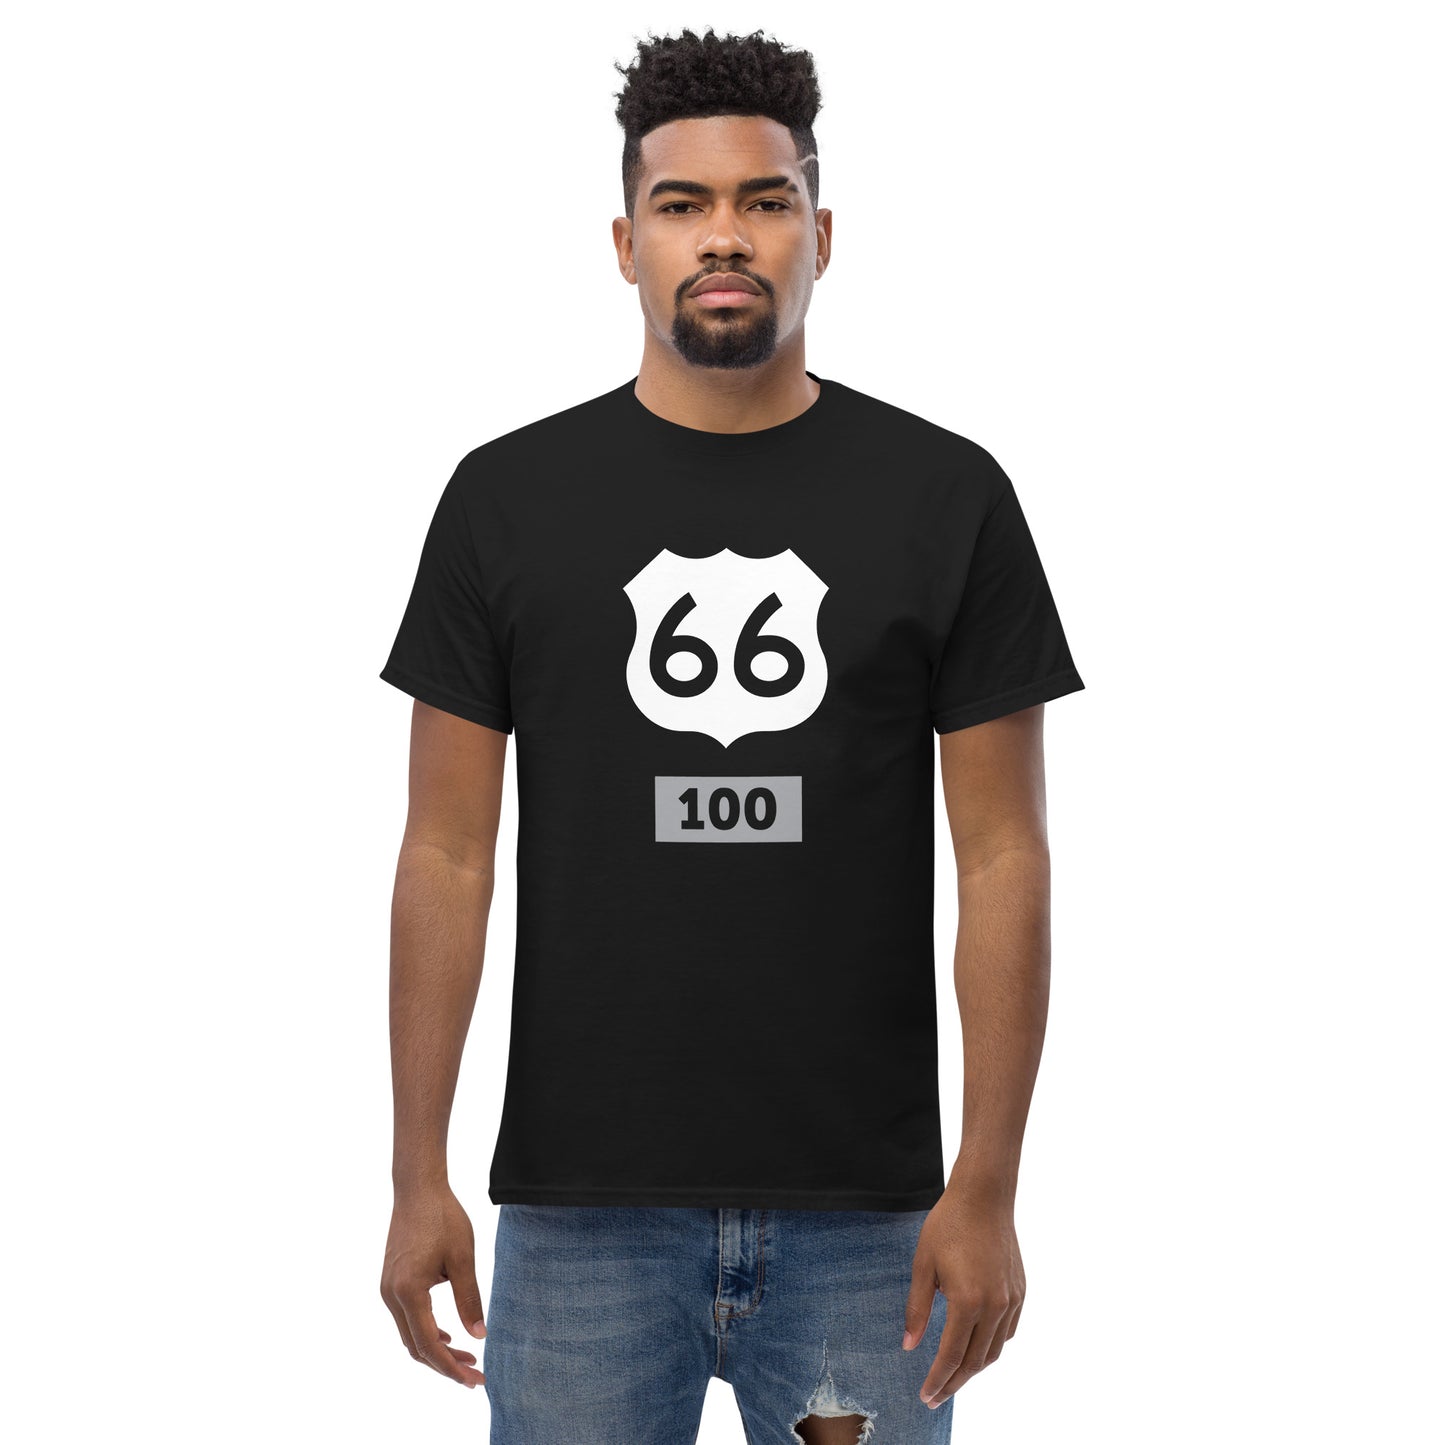 Route 66 at 100 - Men's classic tee